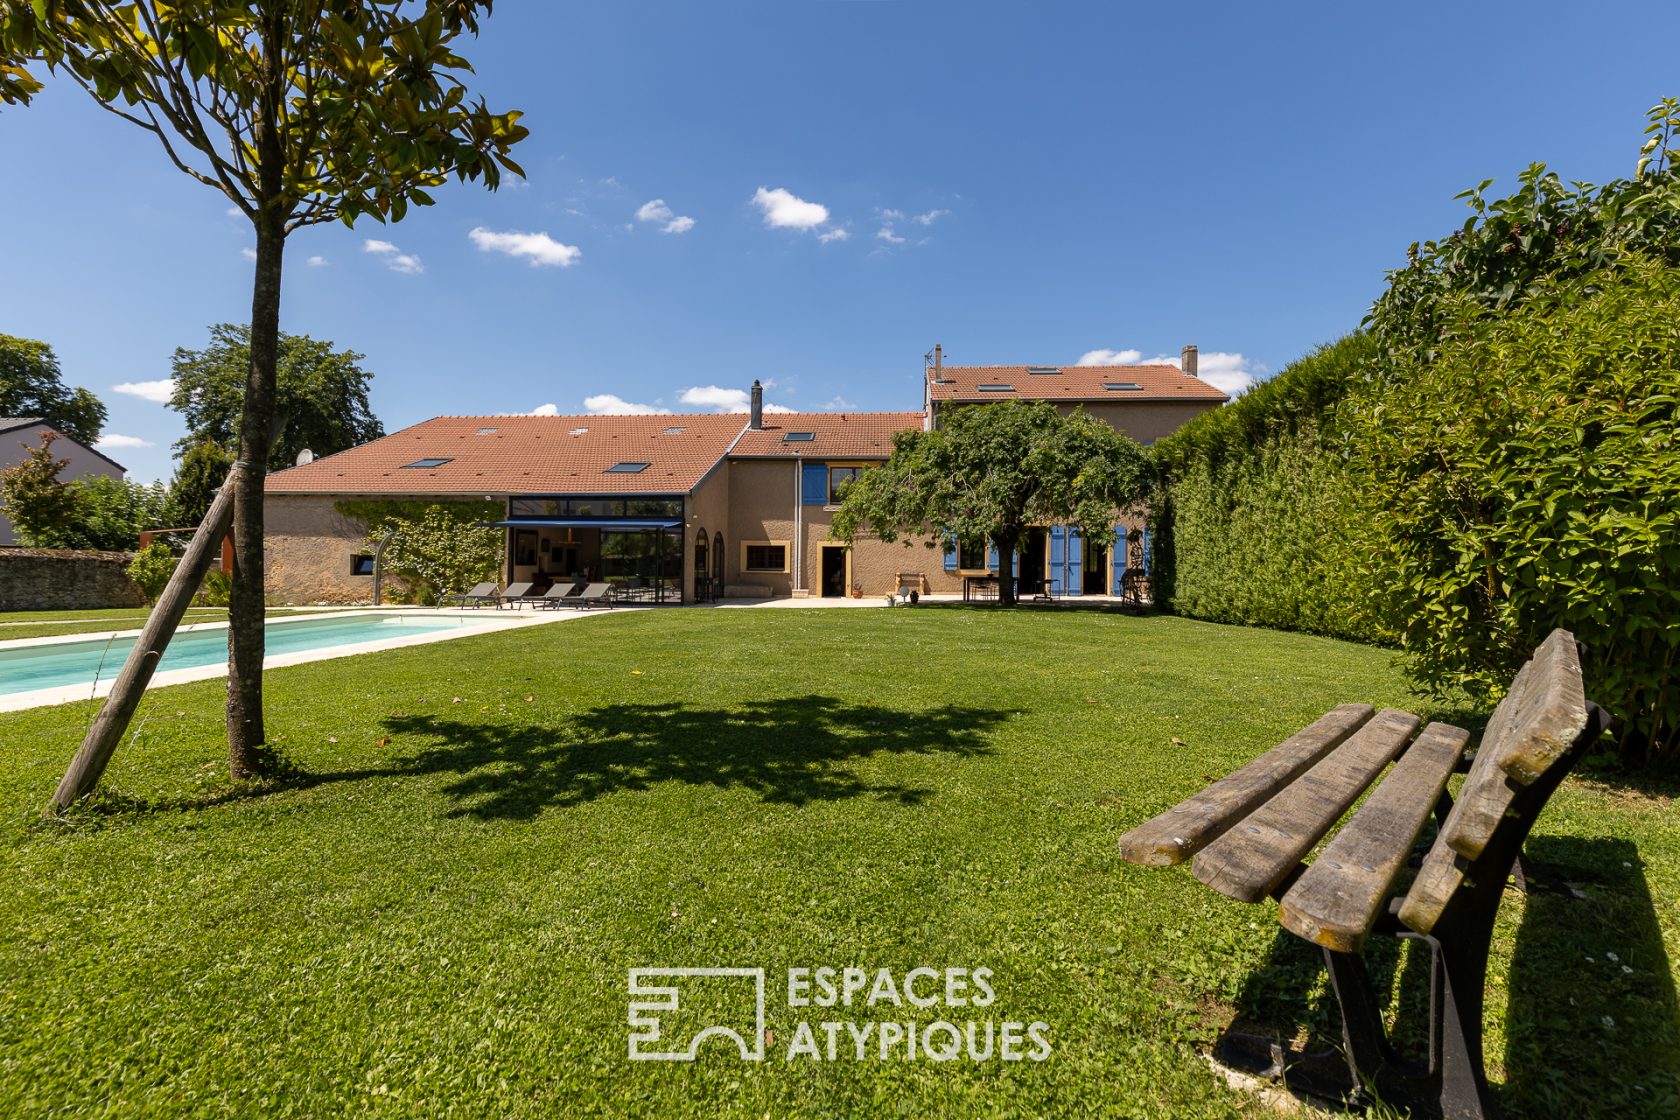 Exceptional farmhouse and its garden with swimming pool